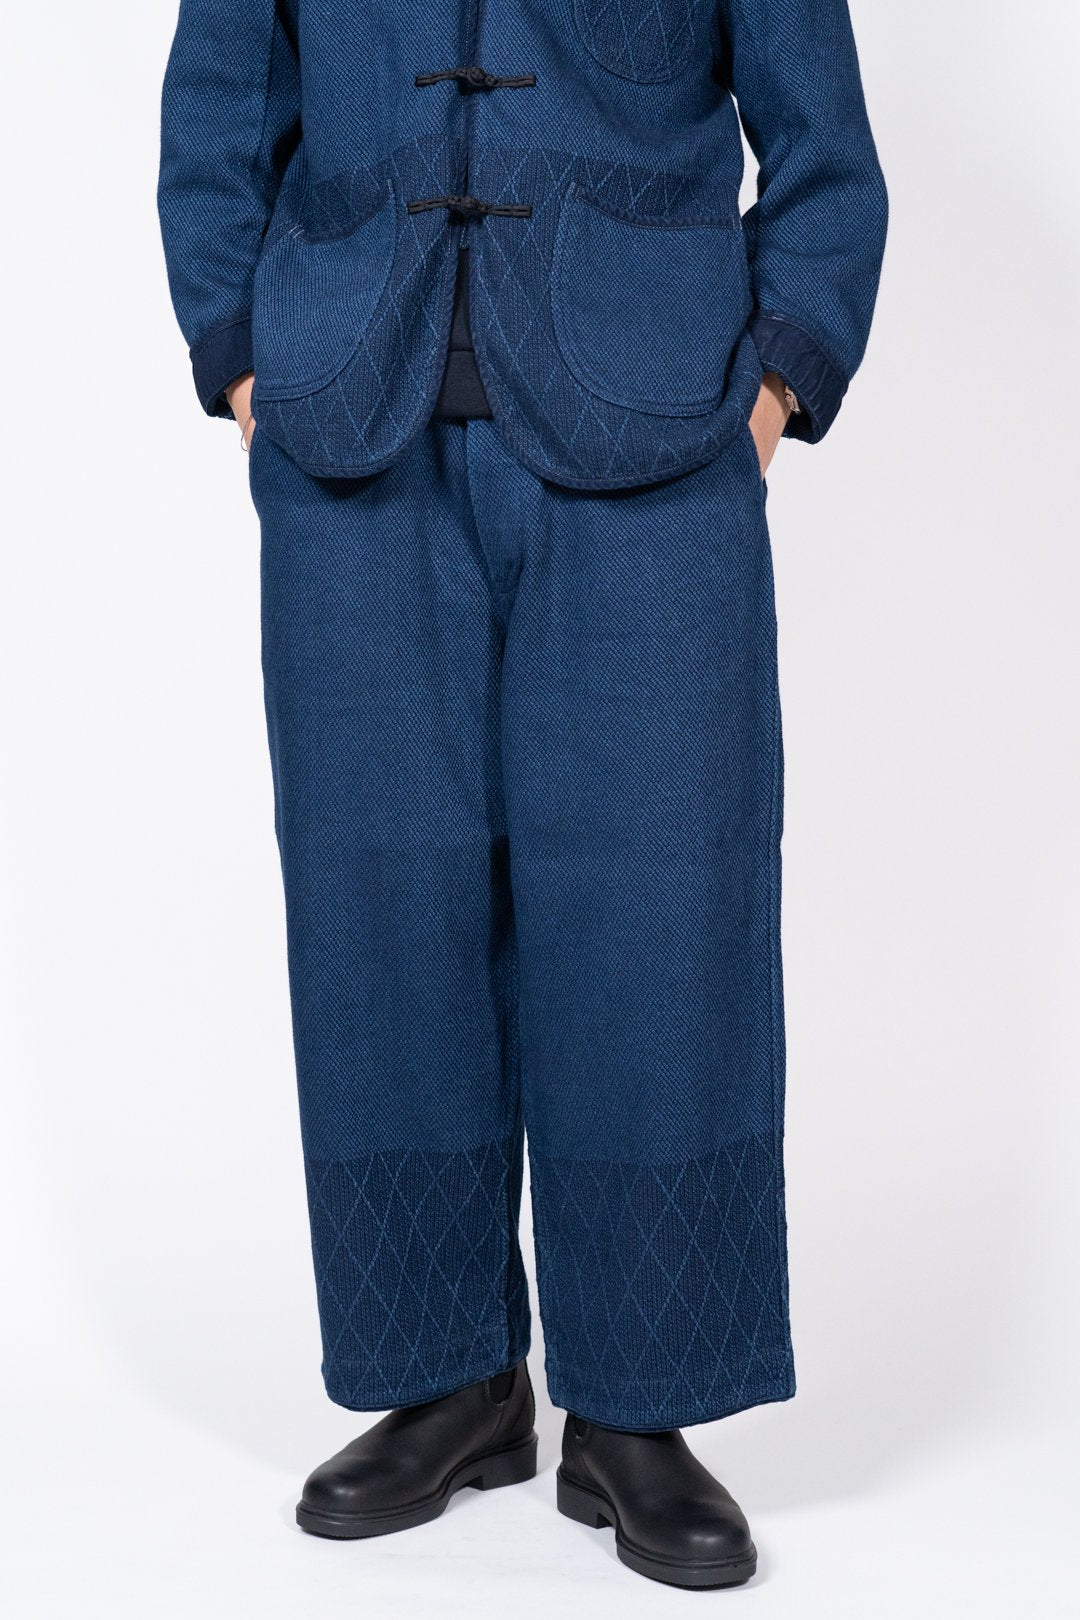 PORTER CLASSIC ポータークラシックKENDO WIDE PANTS www